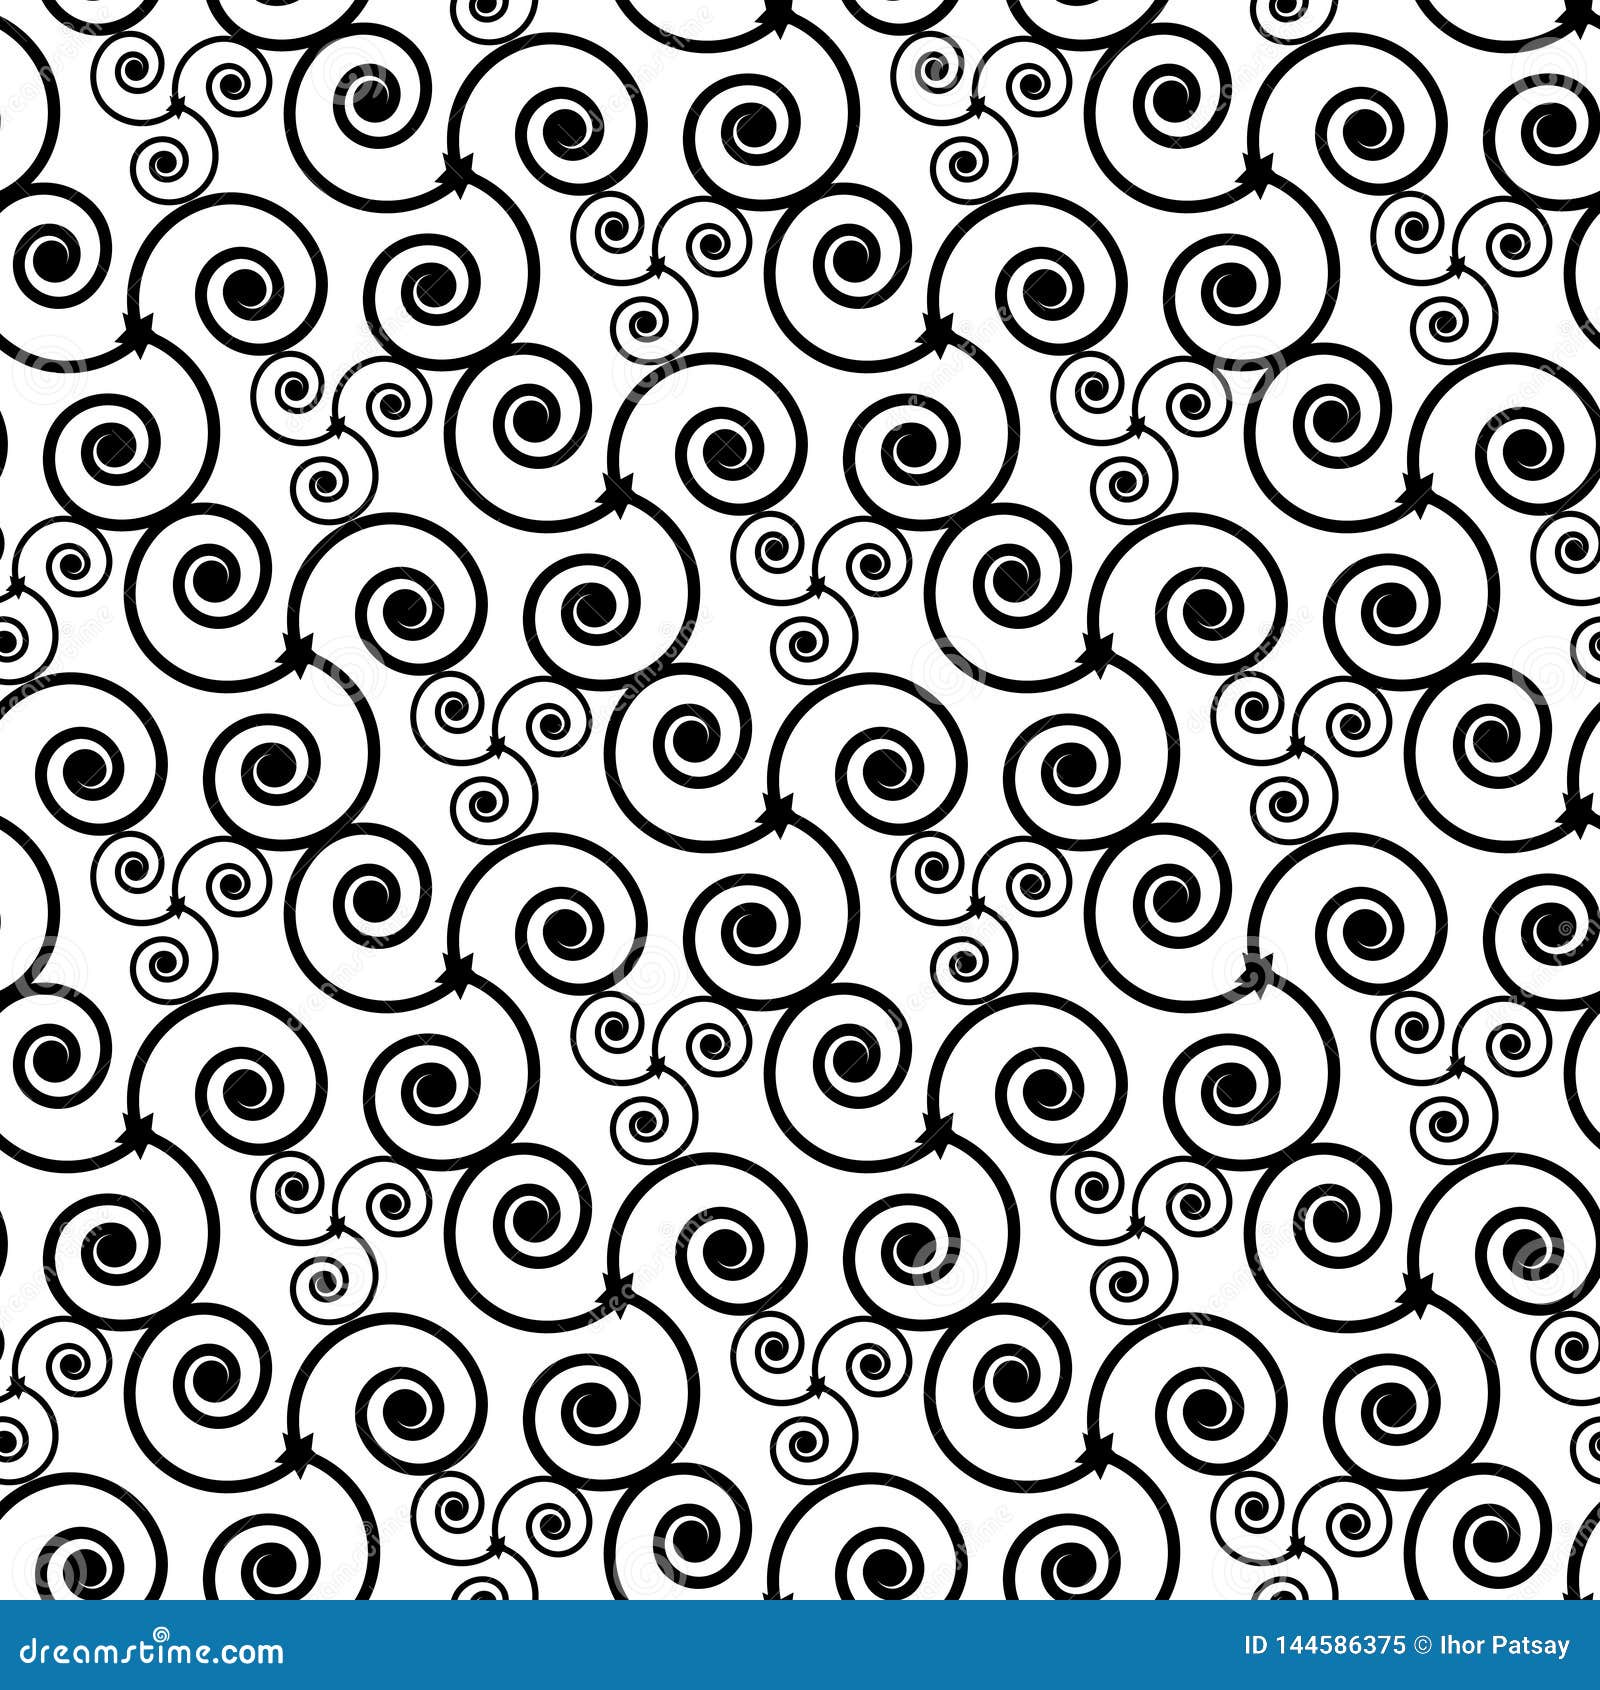 Seamless swirl pattern stock vector. Illustration of page - 144586375